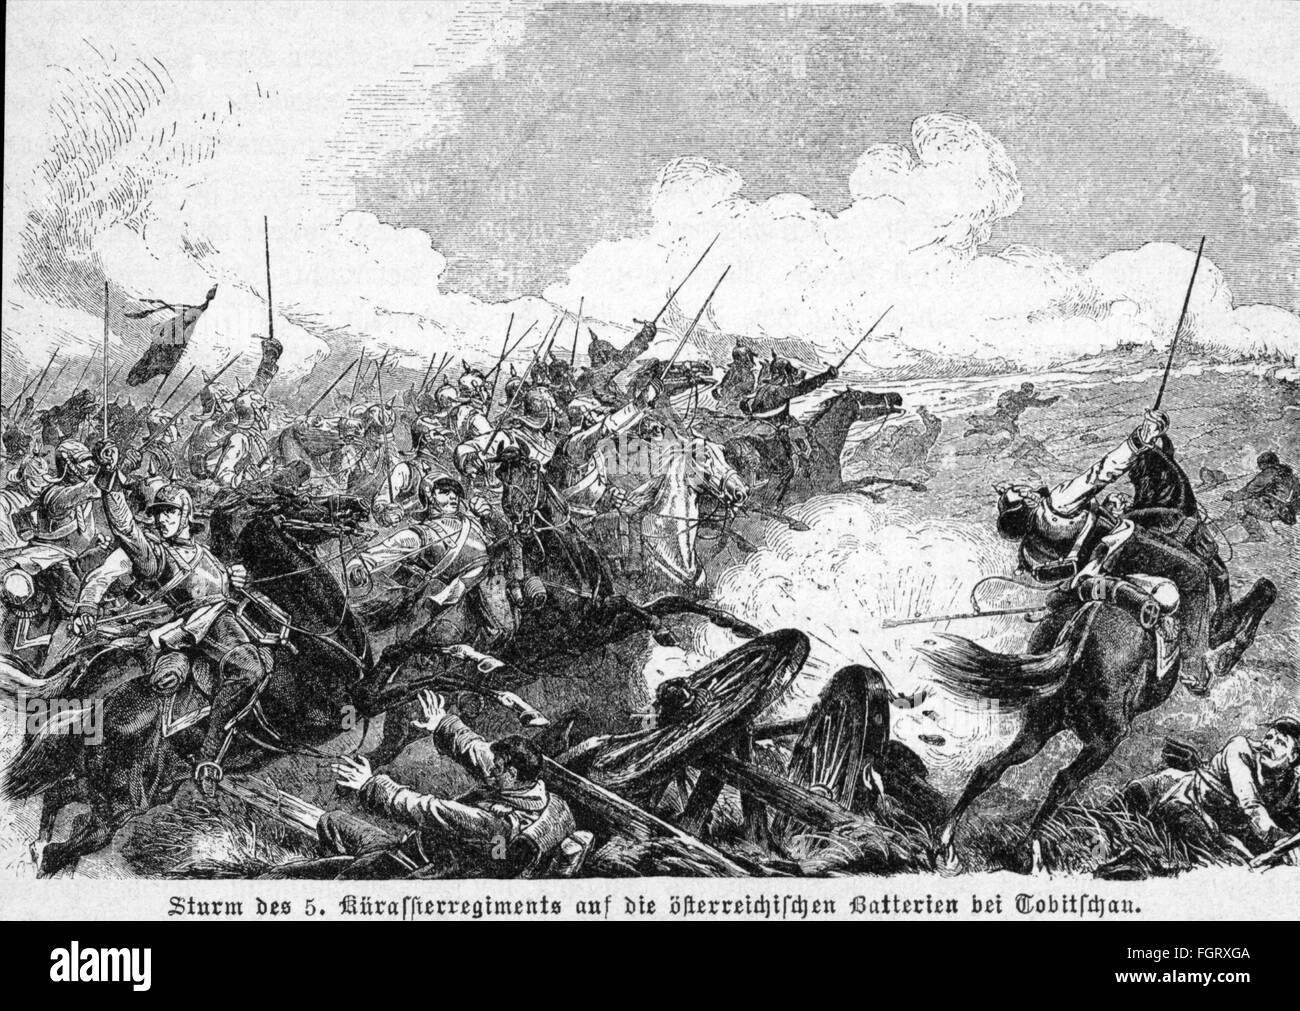 Austro-Prussian War 1866,battle of Tobitschau,15.7.1866,the Prussian 5th Cuirassier Regiment rushing for Austrian batteries,wood engraving,late 19th century,Prussian,Austrian,fight,fights,cavalry,cavalries,artillery,assaults,attack,attacks,touch,cavalry charge,assault,storm,storming,charging,charge,cuirassiers,Prussia,Austria,Tovacov,Moravia,Czechia,Czech Republic,Kingdom of Bohemia,horseman,horsemen,cavalryman,cavalrymen,horse,horses,soldiers,soldier,people,men,man,male,battle,battles,rush,rushing,batteries,batte,Additional-Rights-Clearences-Not Available Stock Photo